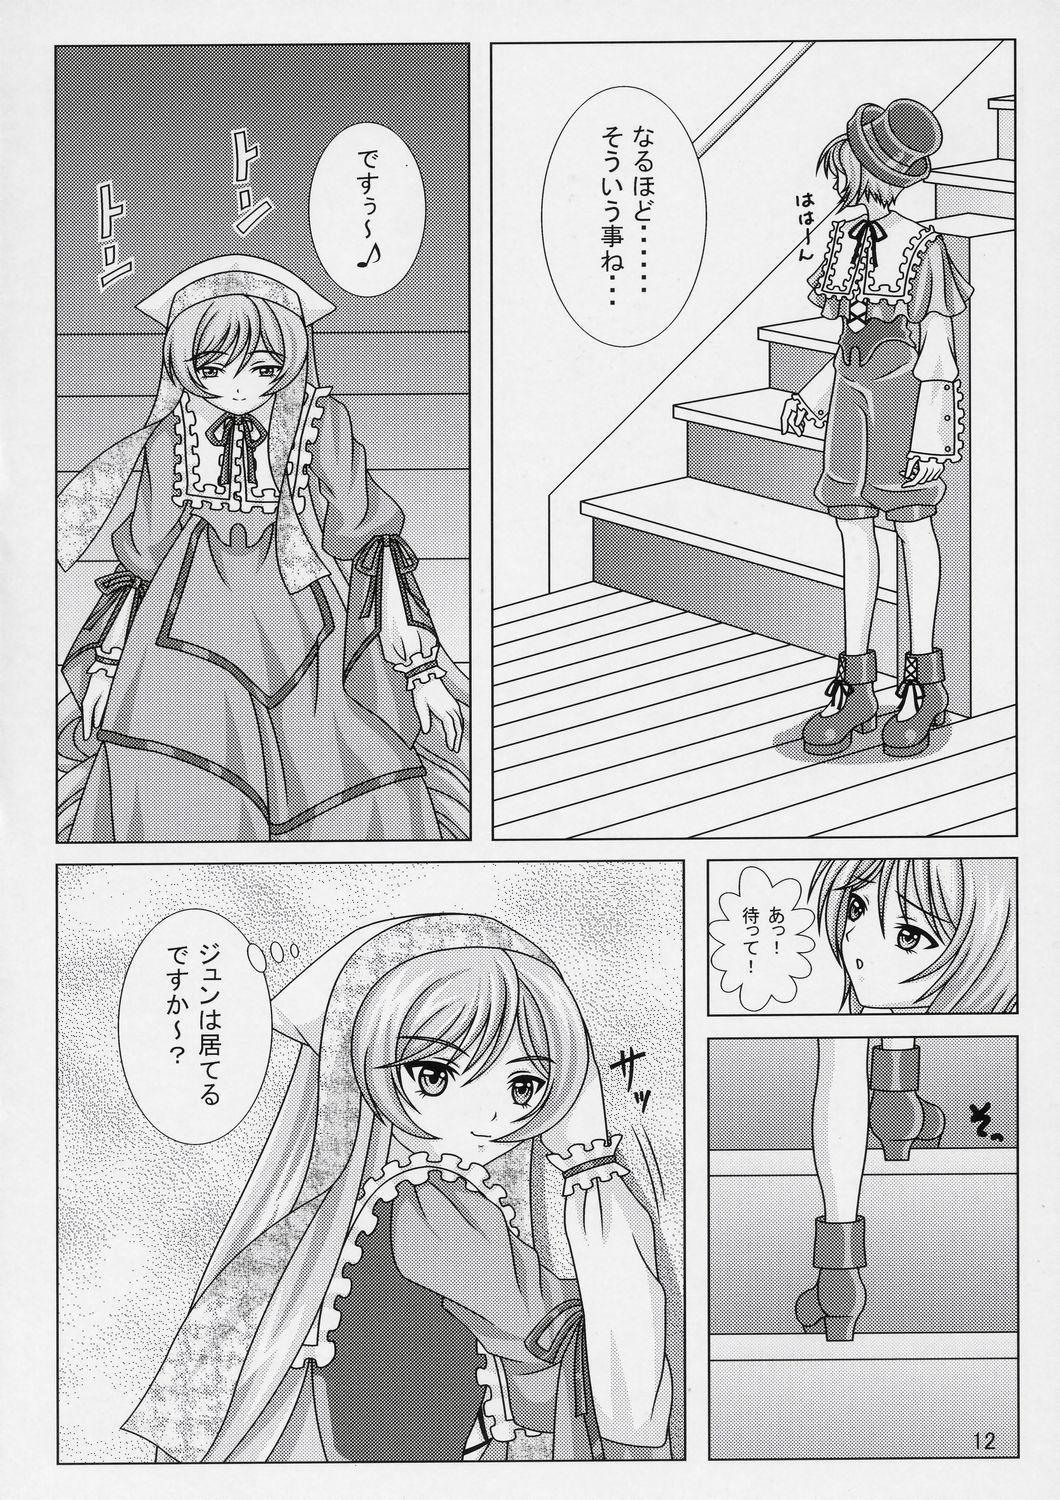 Screaming Lovely Dolls 2 - Rozen maiden Pete - Page 11